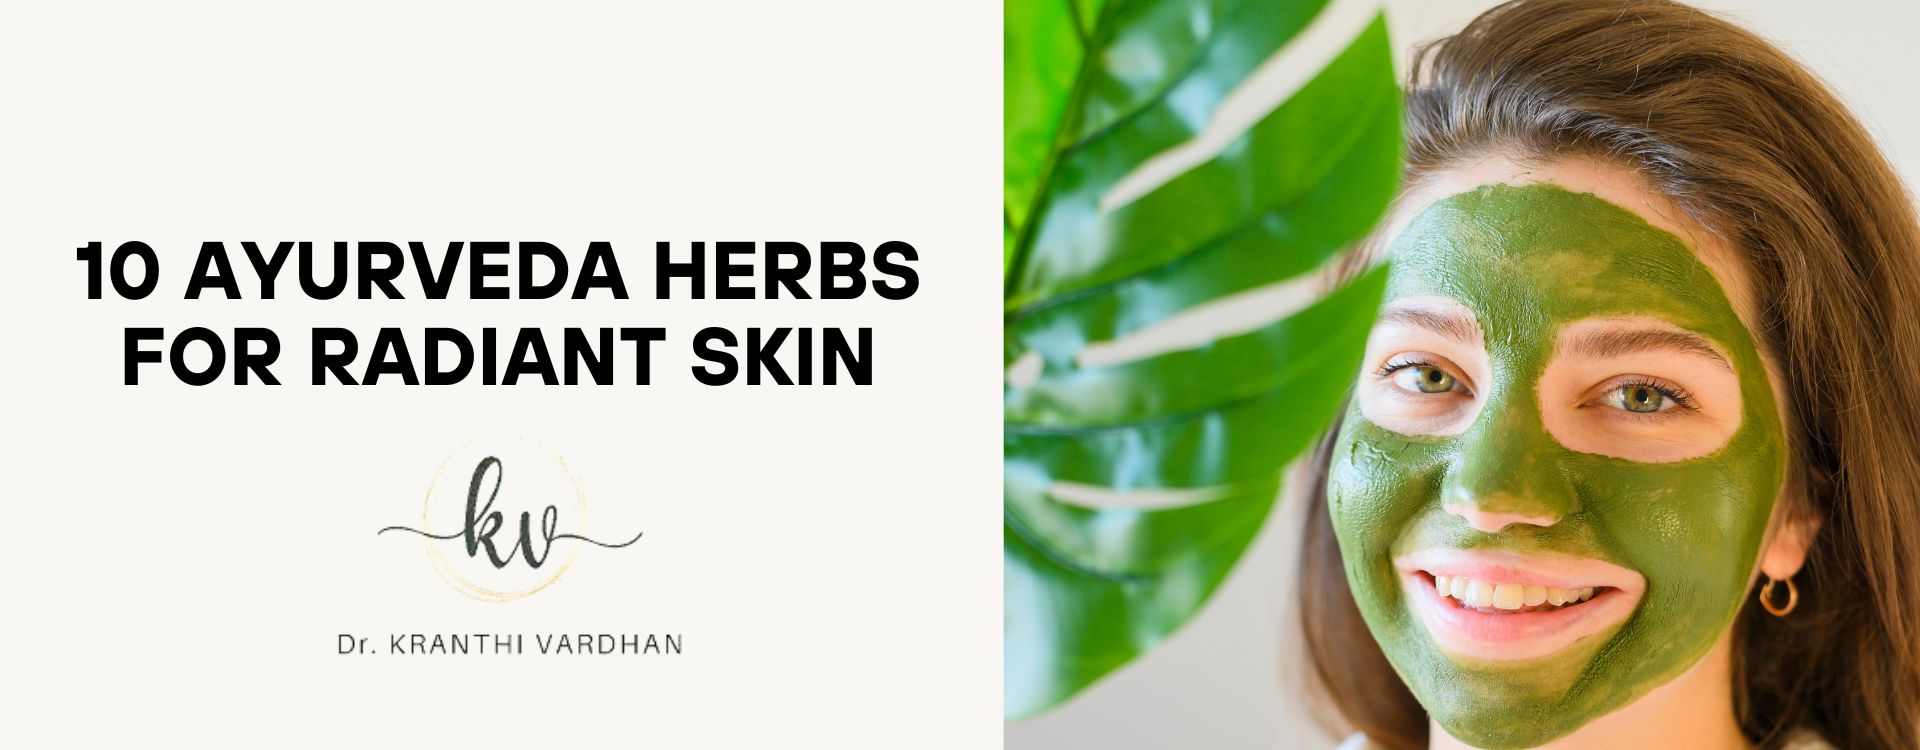 Glow Up with 10 Ayurveda Herbs for Radiant Skin